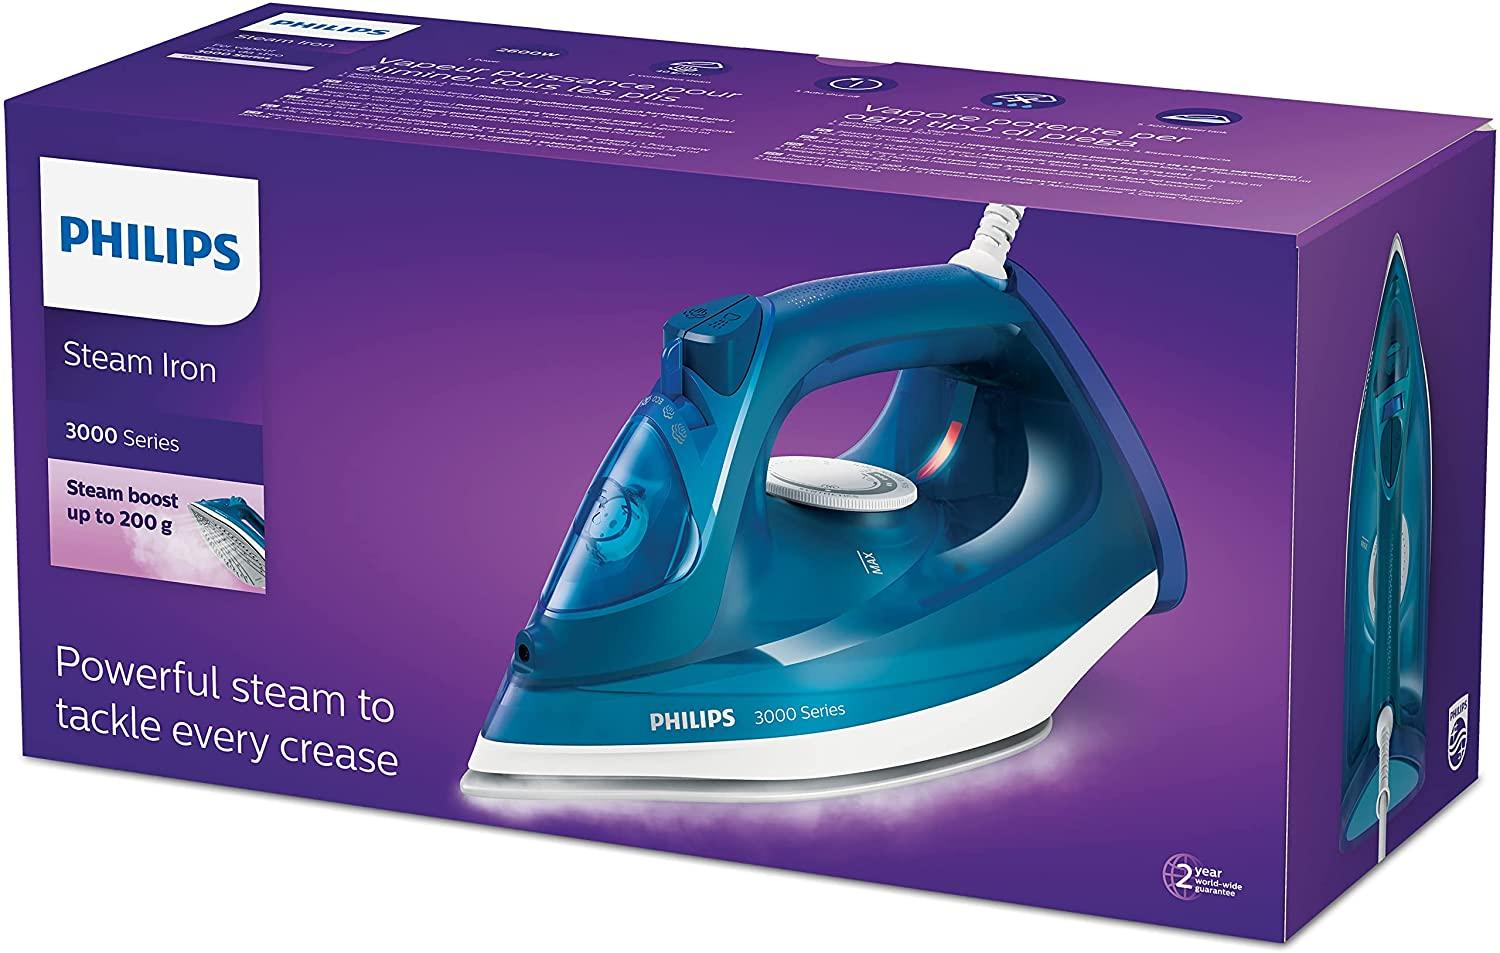 Selected image for PHILIPS Pegla DST3040/70